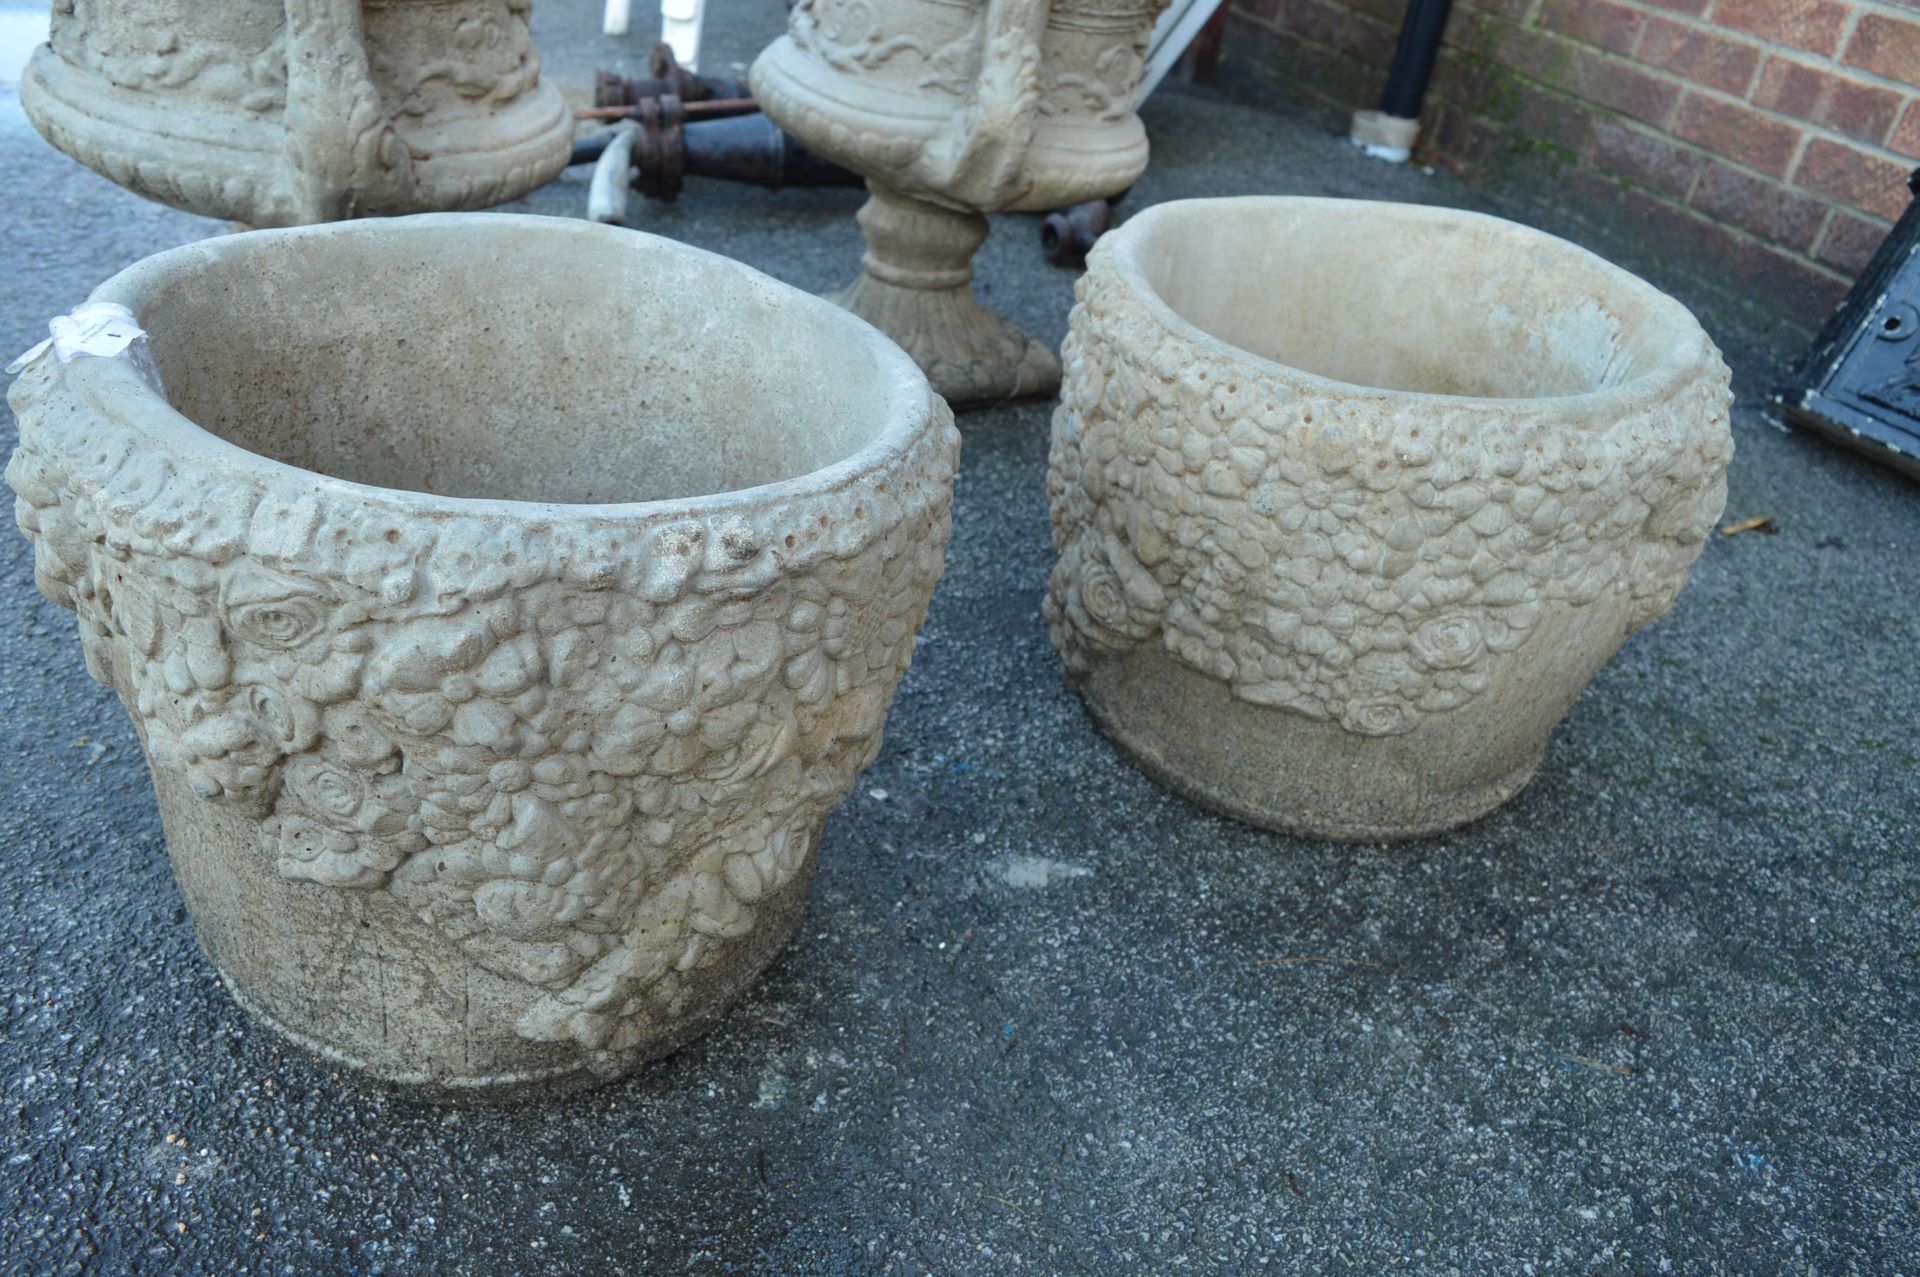 Pair of Floral Decorated Garden Planters